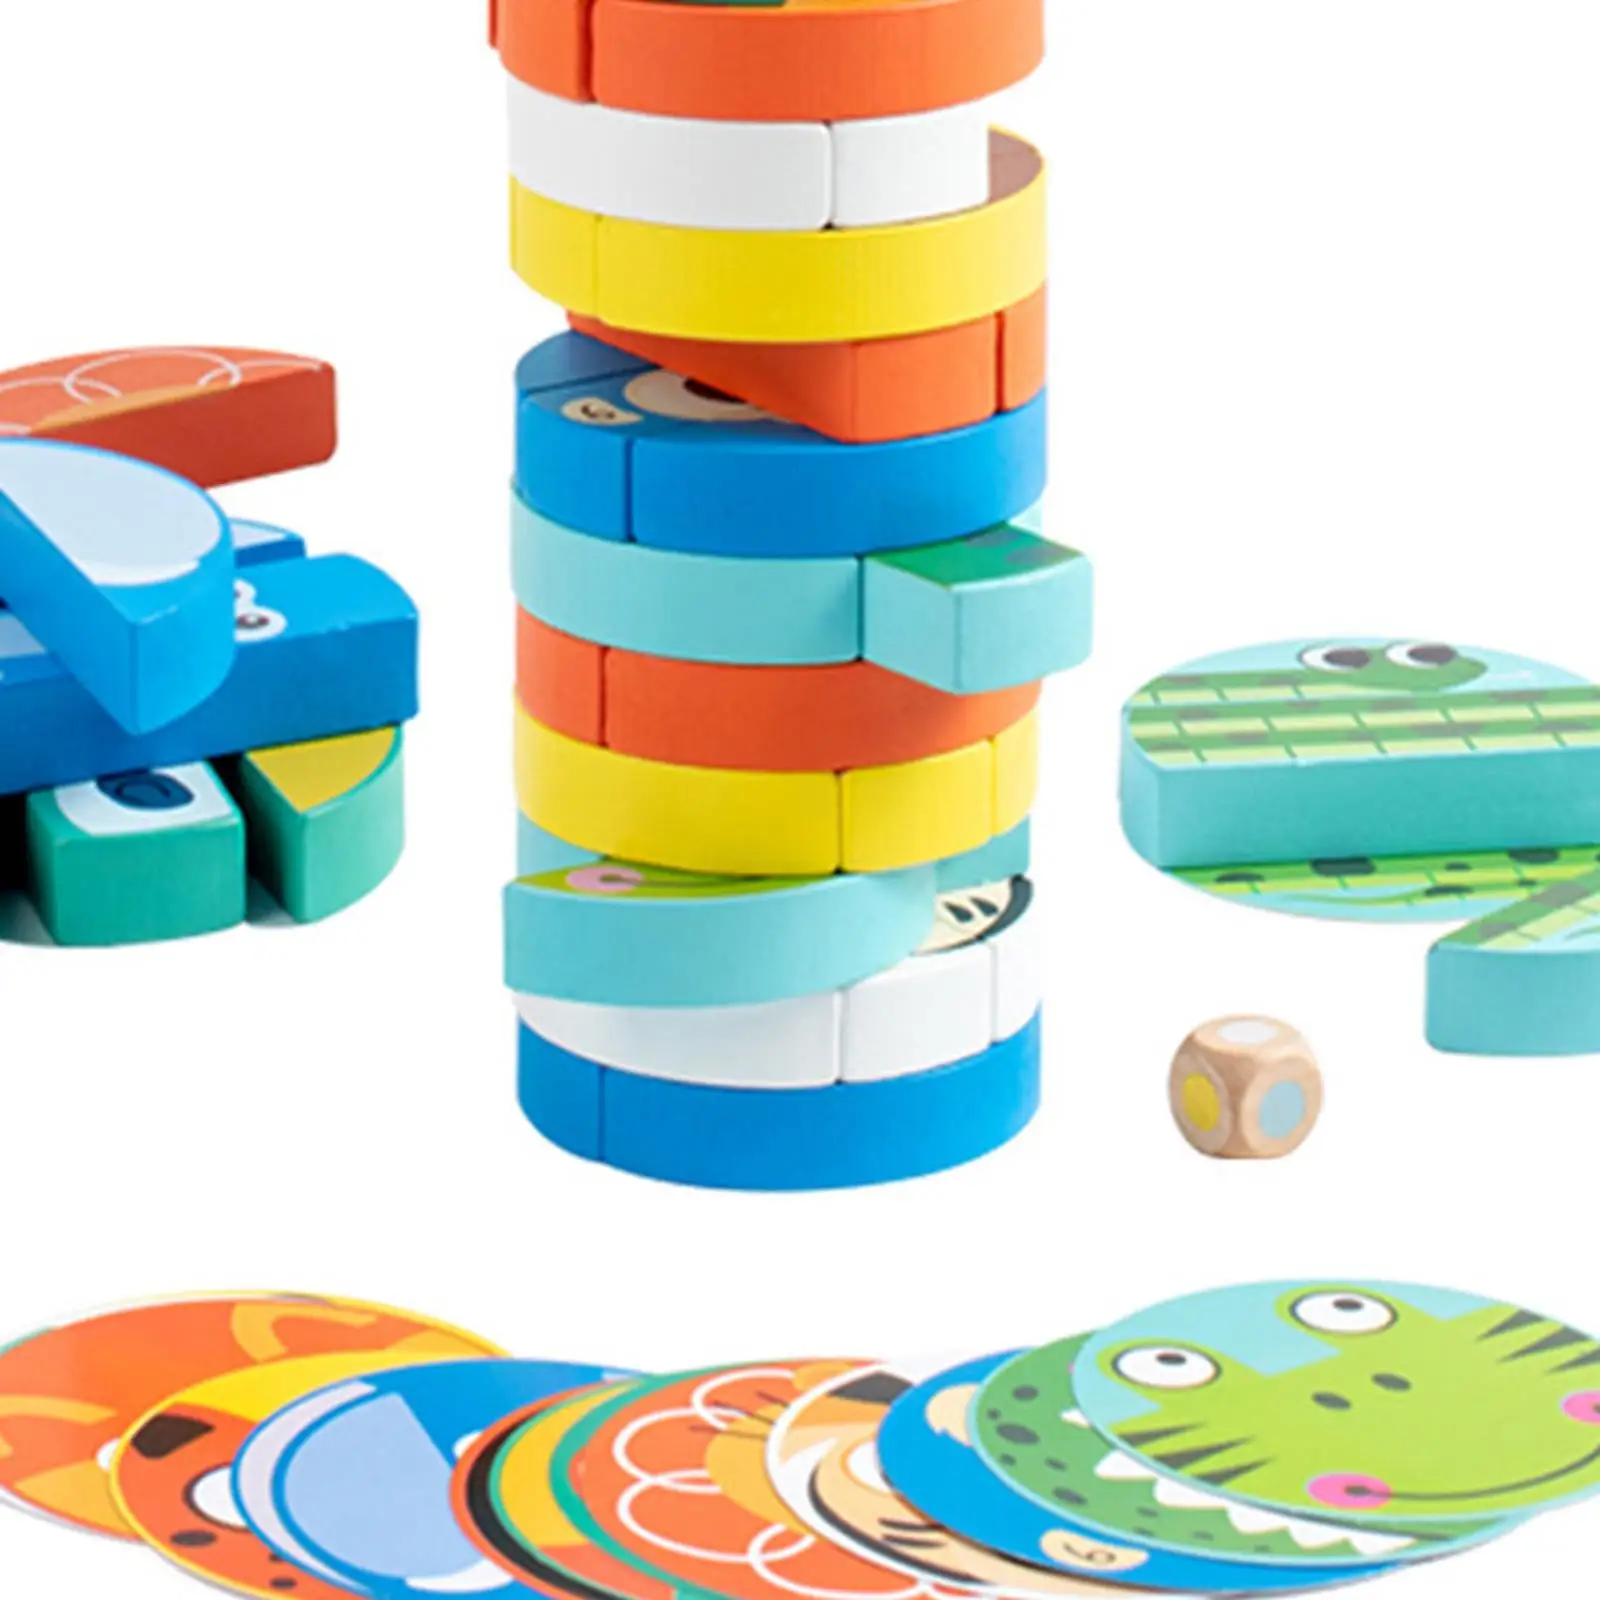 Wooden Blocks Stacking Game Educational Toddlers Games Tumble Towers Game for New Year Holiday Birthday Gifts Ages 3-6 Toddlers